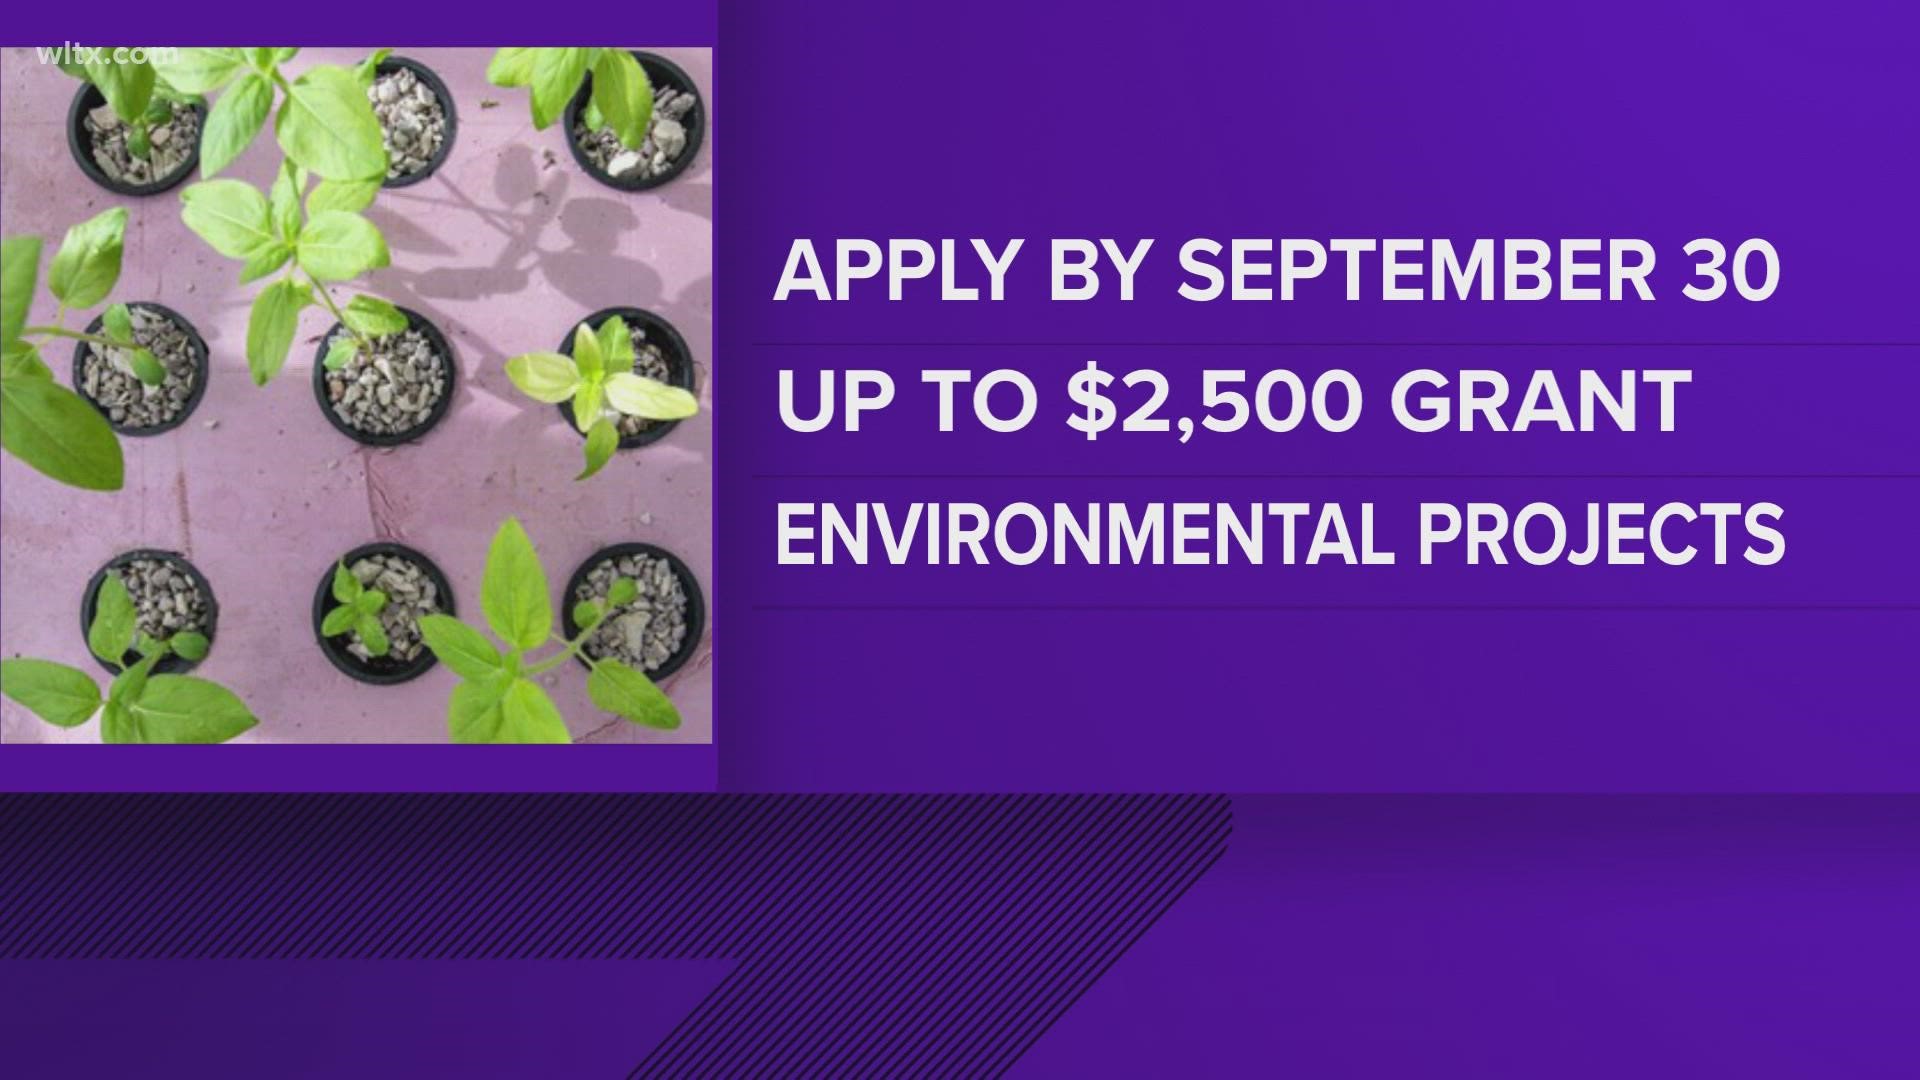 The funding is available for support of classroom projects that build environmental awareness among students.